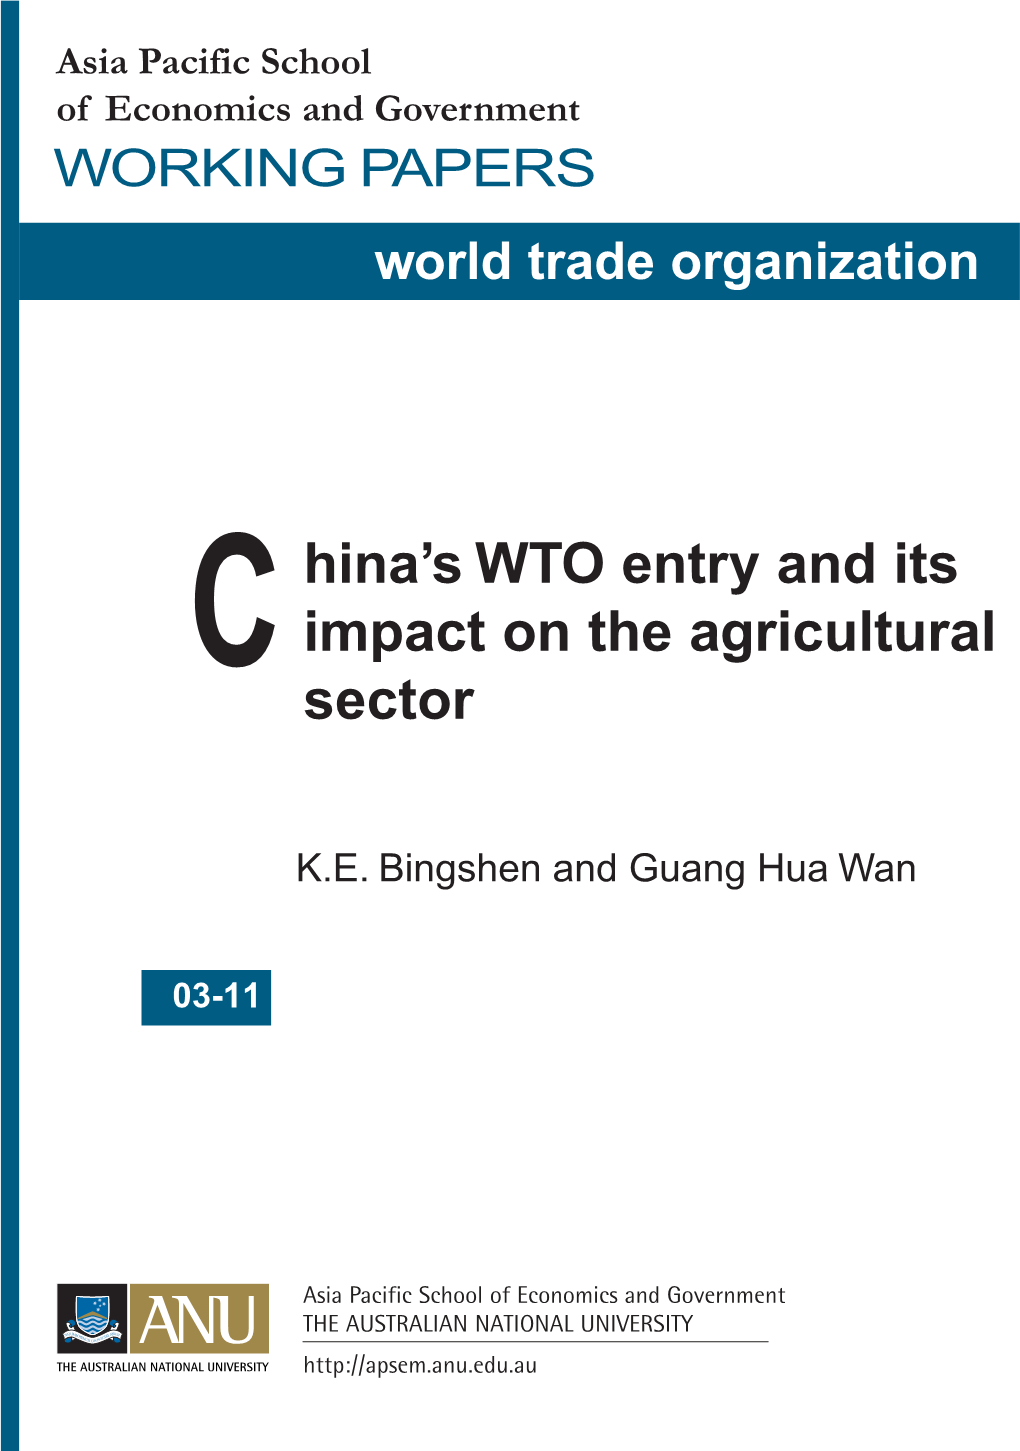 China's WTO Entry and Its Impact on the Agricultural Sector